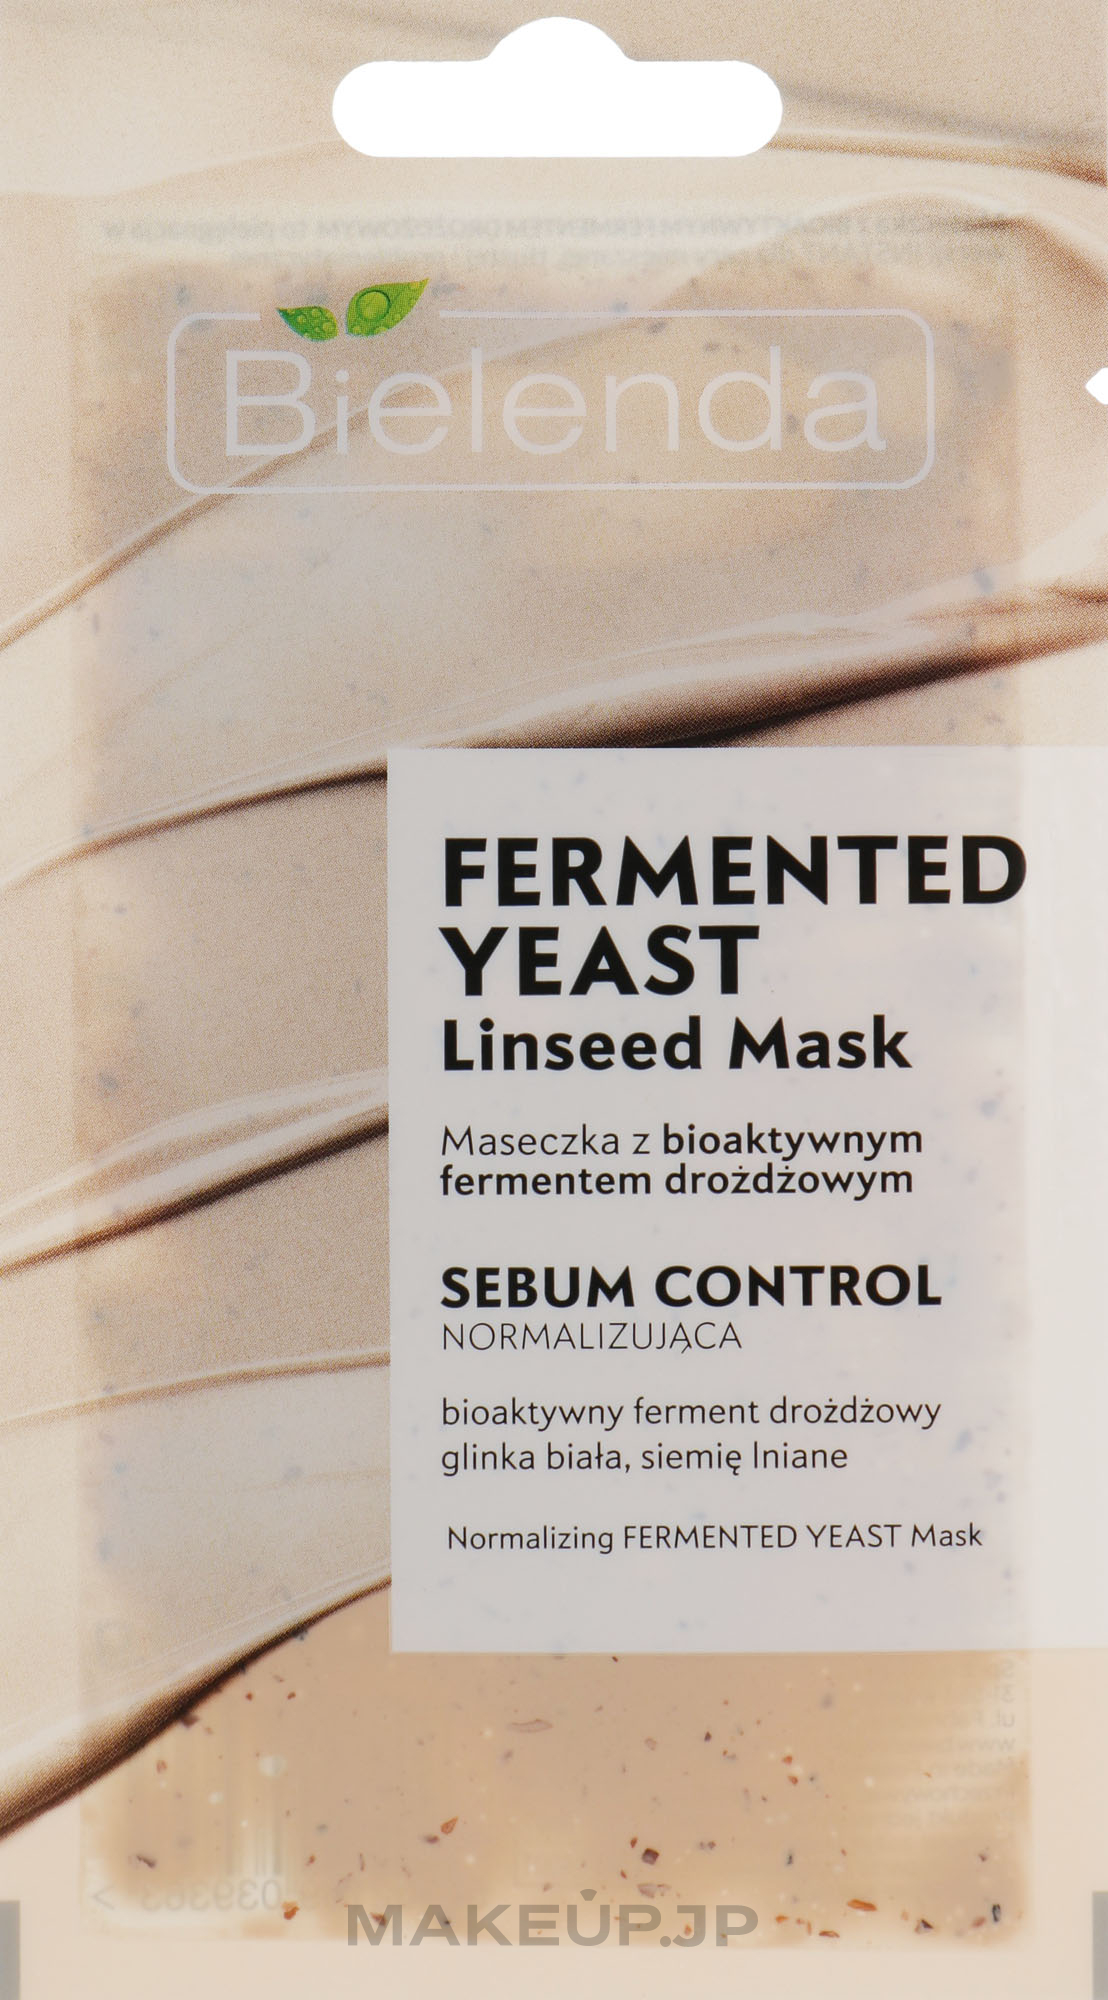 Enzyme Face Mask - Bielenda Fermented Yeast Linseed Mask — photo 8 g